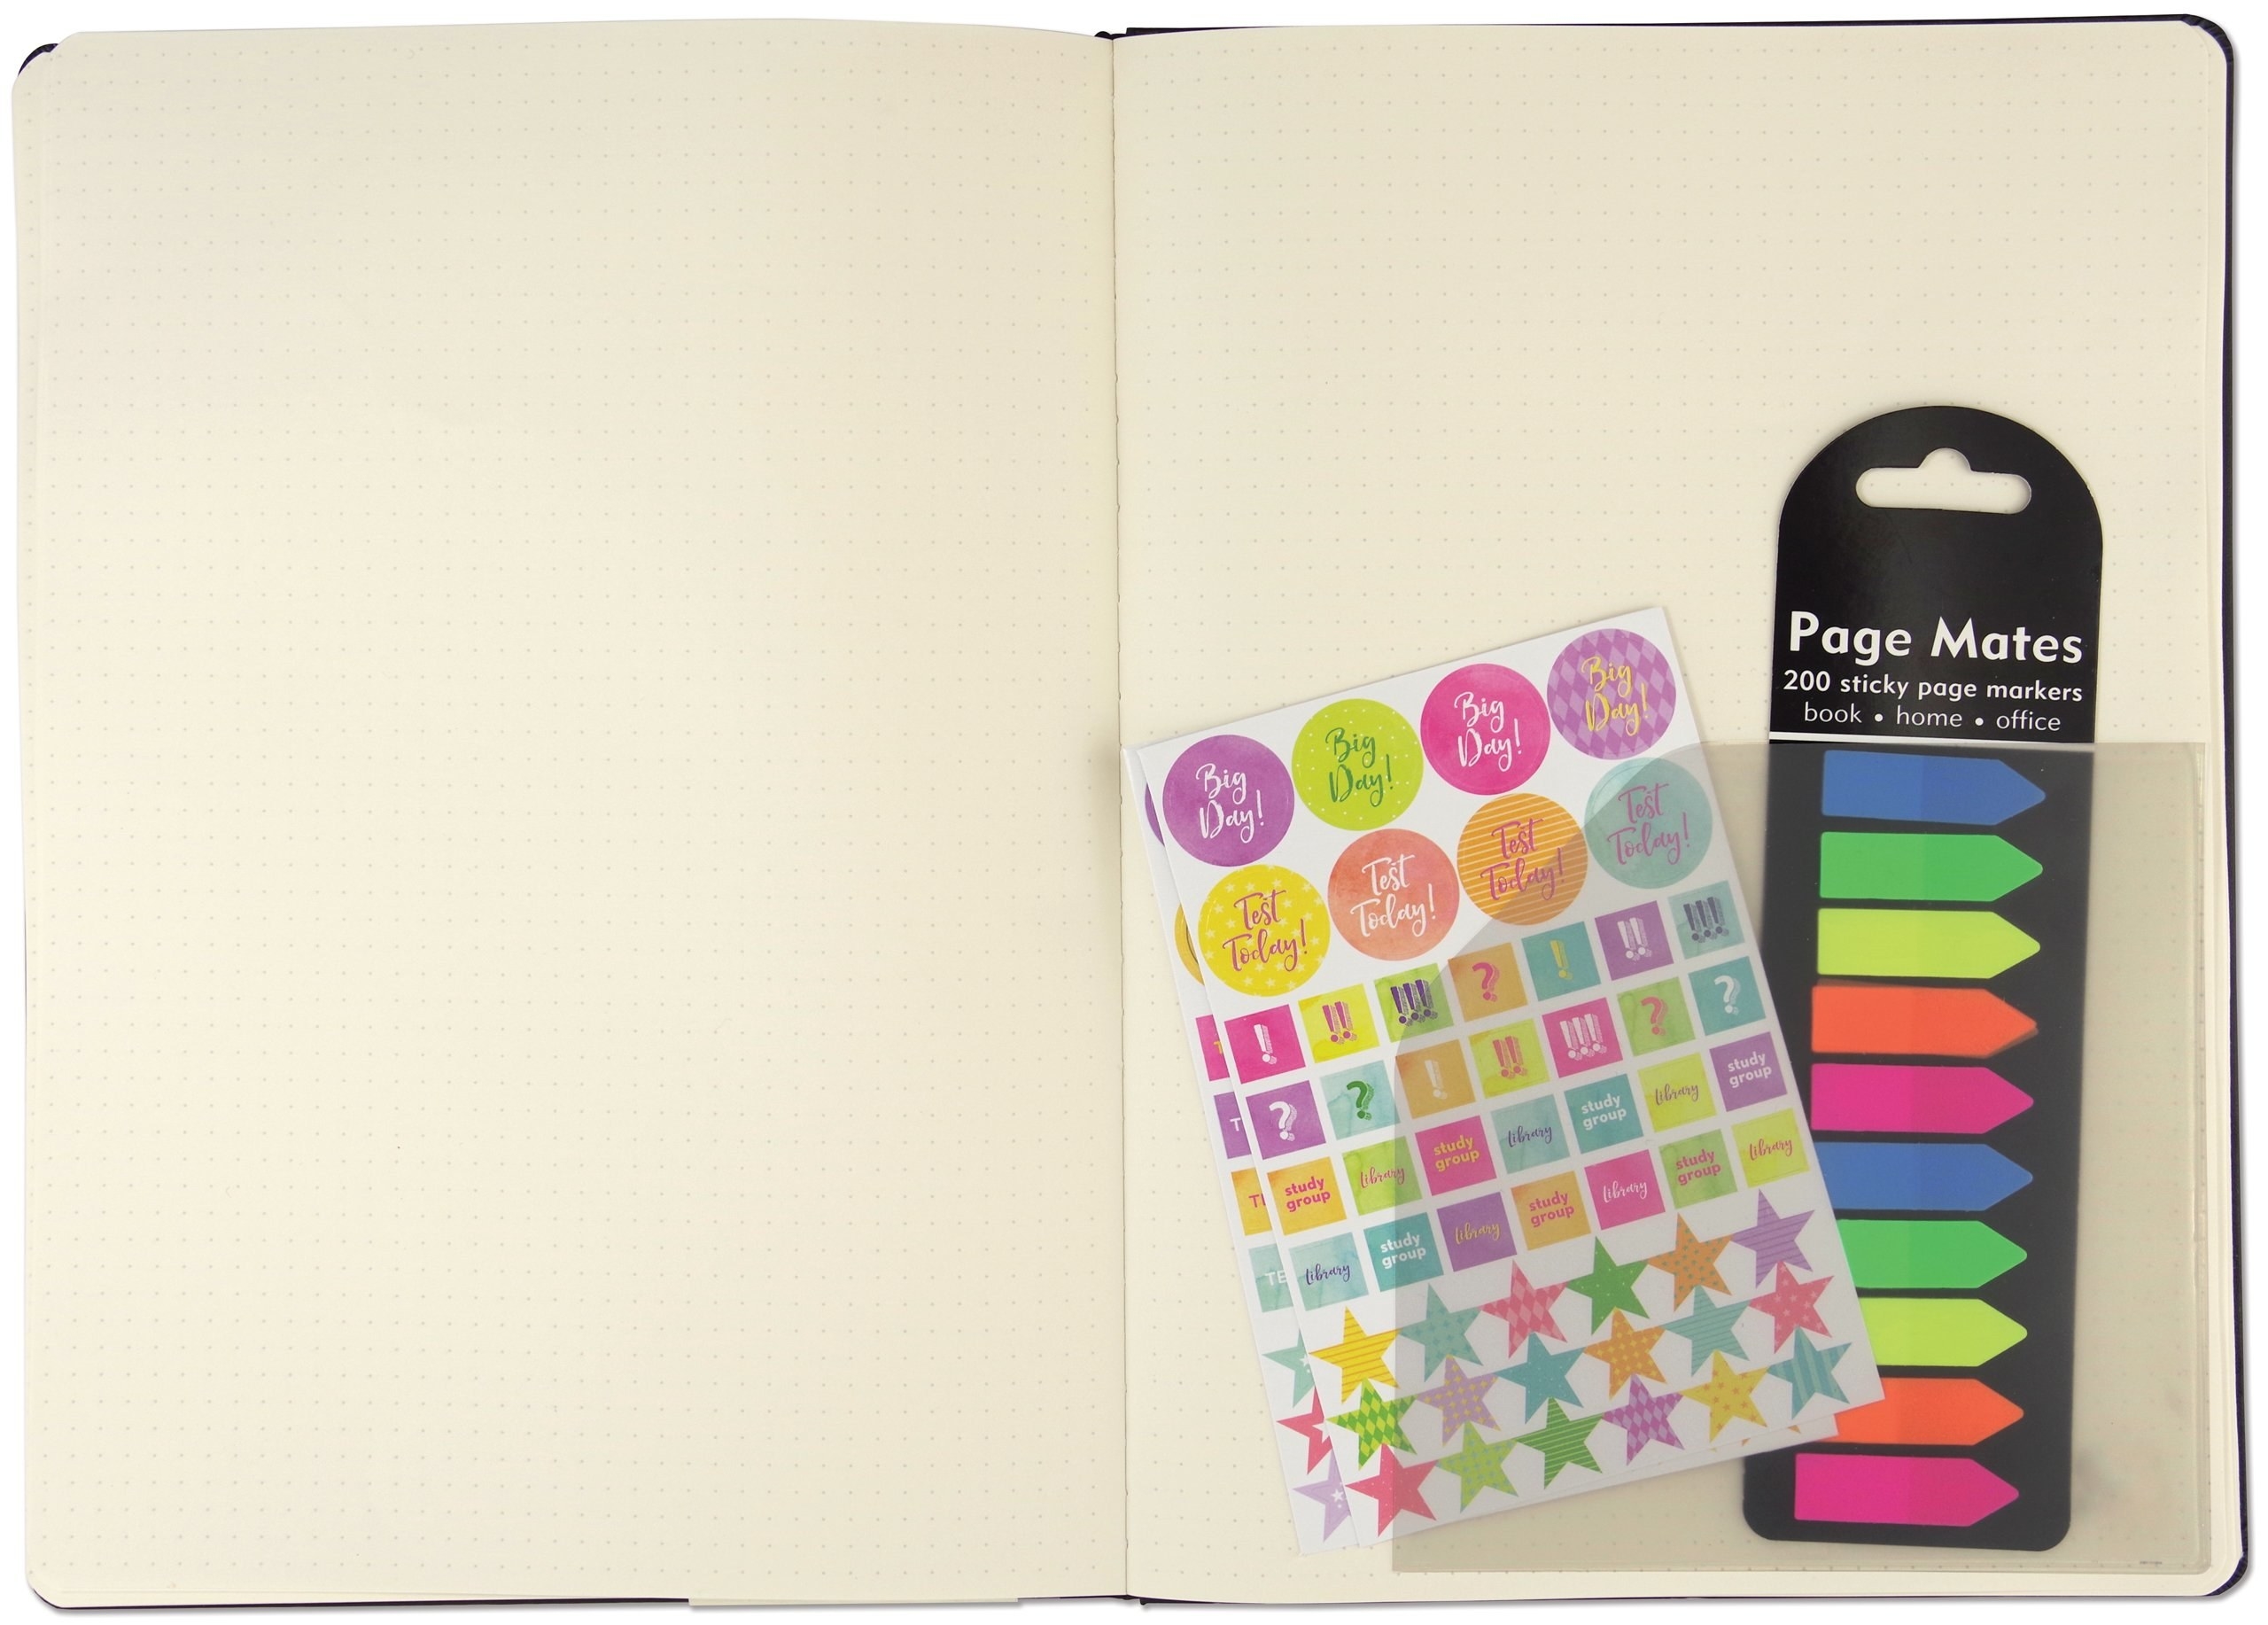 An open notebook with a vinyl pocket in the bottom corner of the page holding stickers